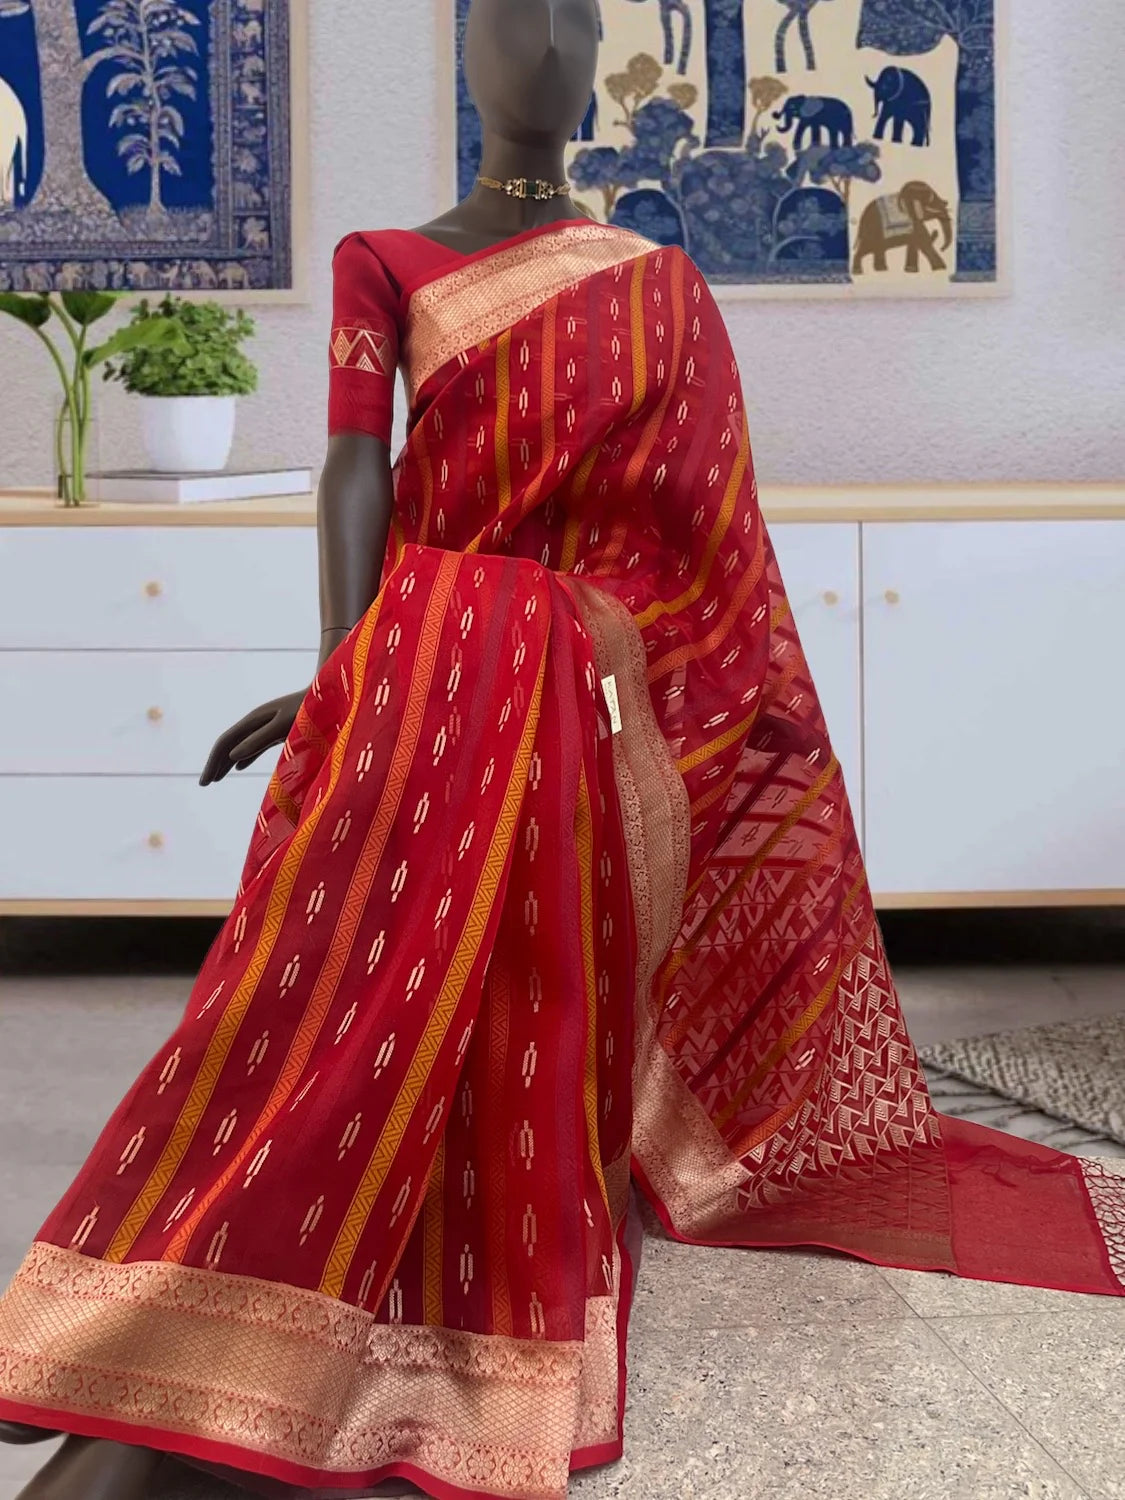 Top 5 Reasons Why Organza Sarees are Trending